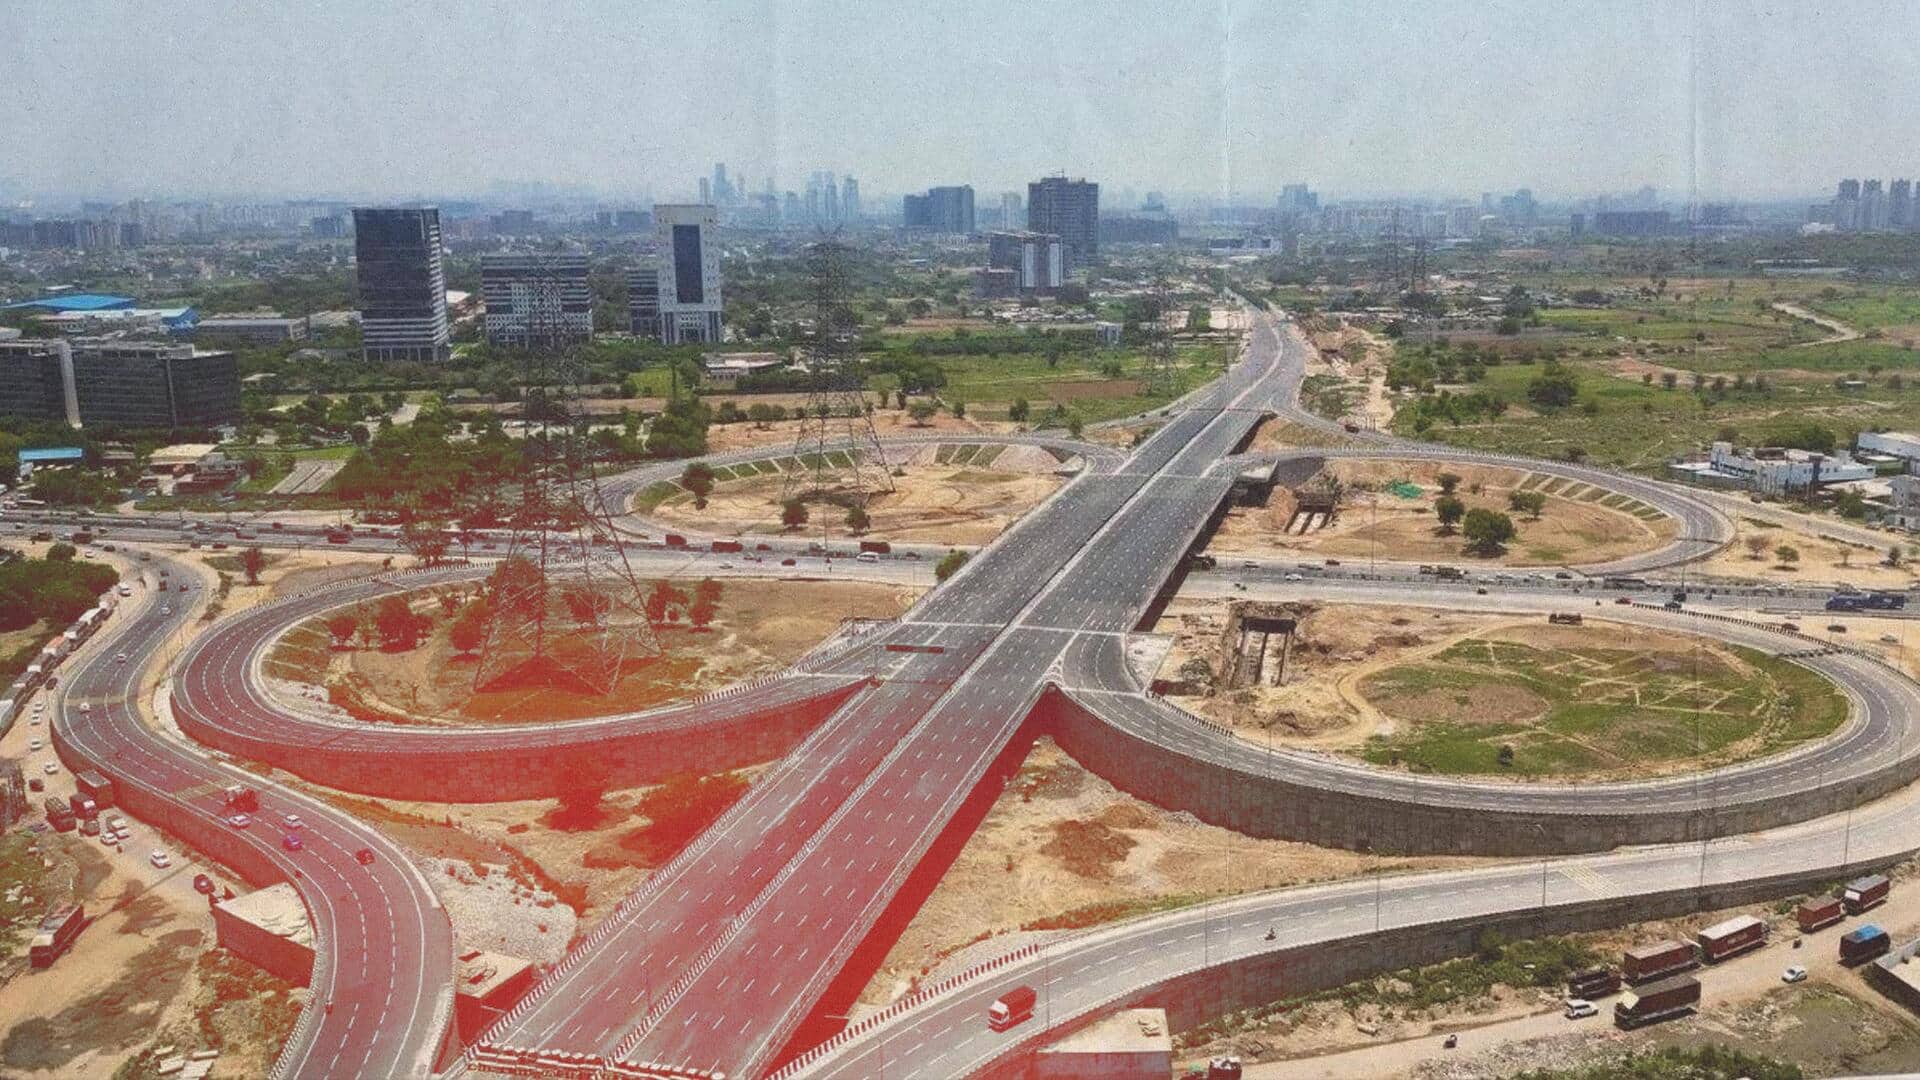 Dwarka Expressway: All key features of India's new 'engineering marvel'